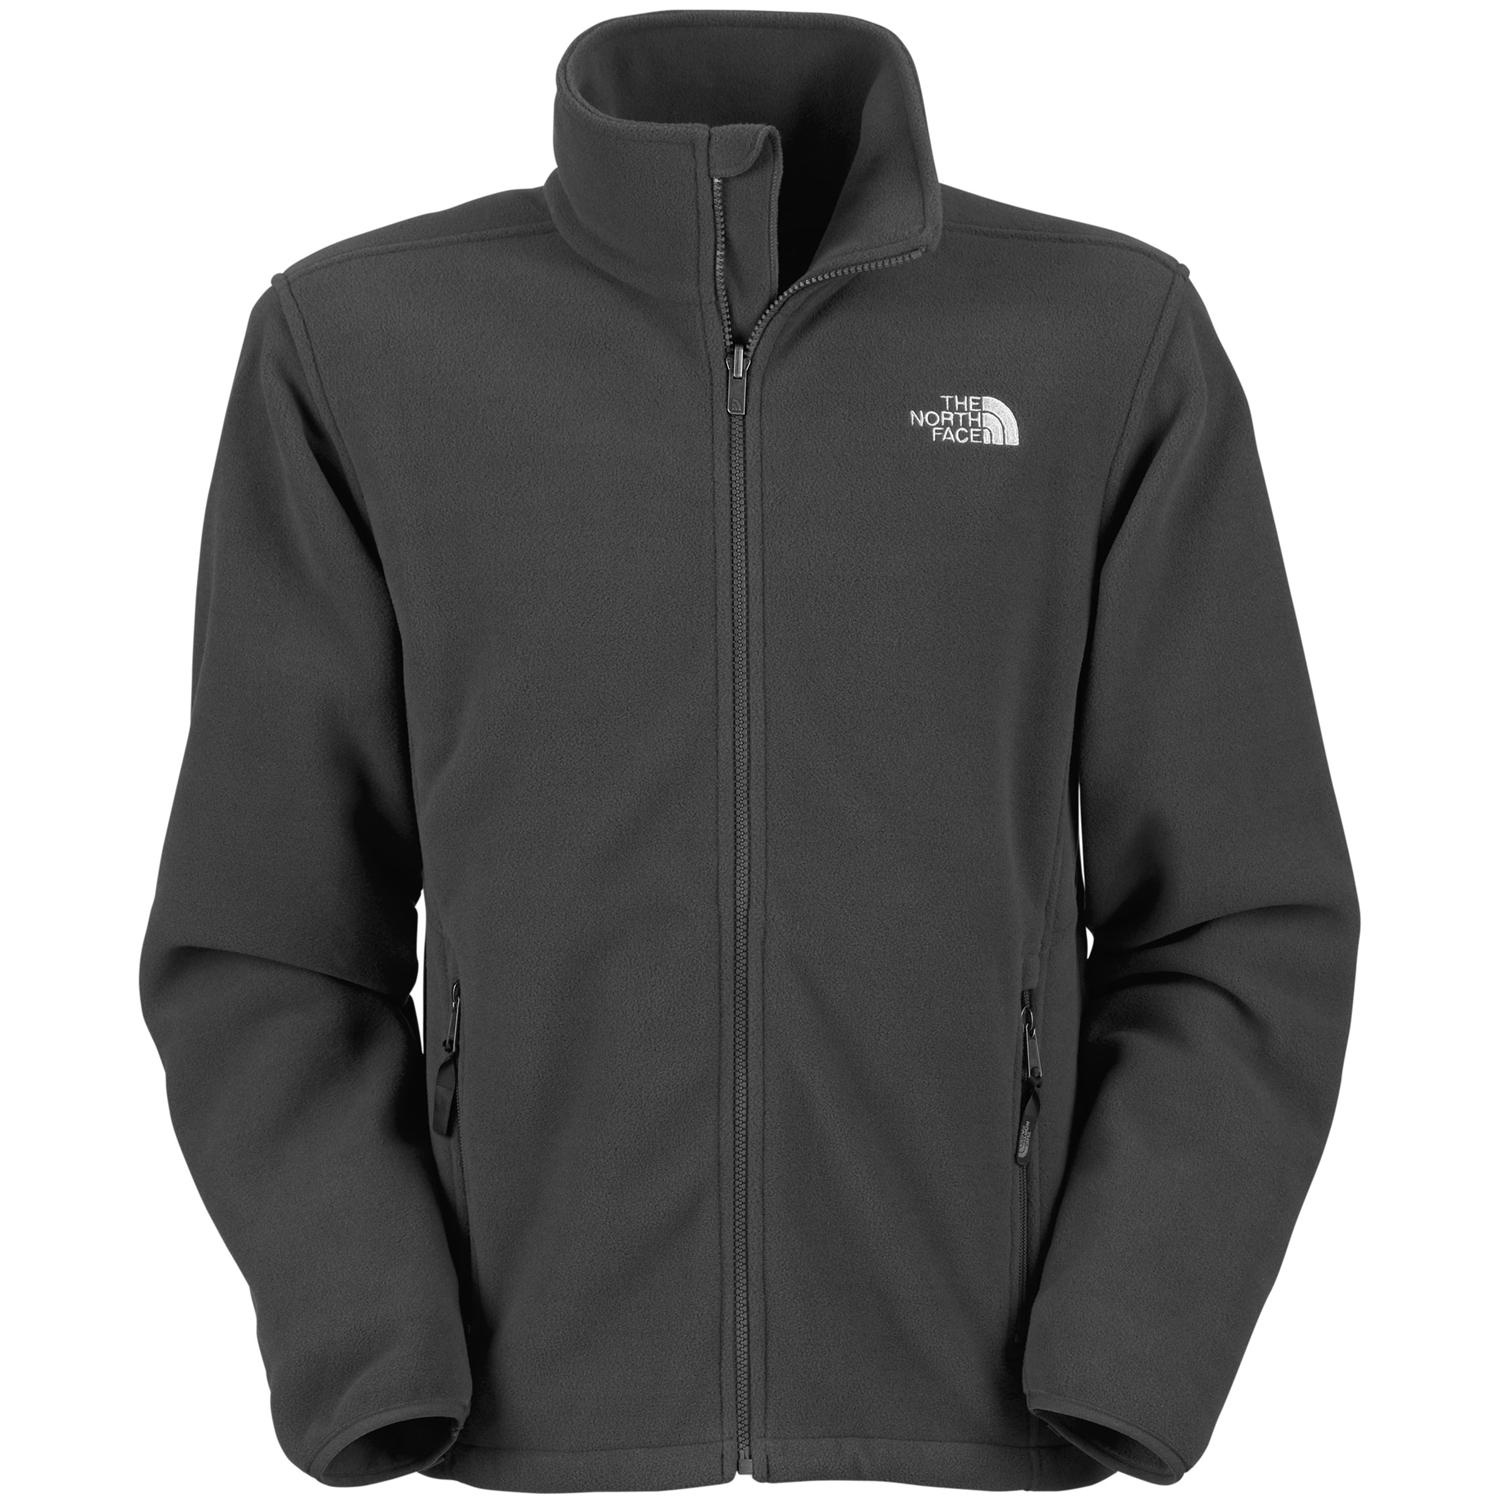 The North Face Pumori Jacket | evo outlet